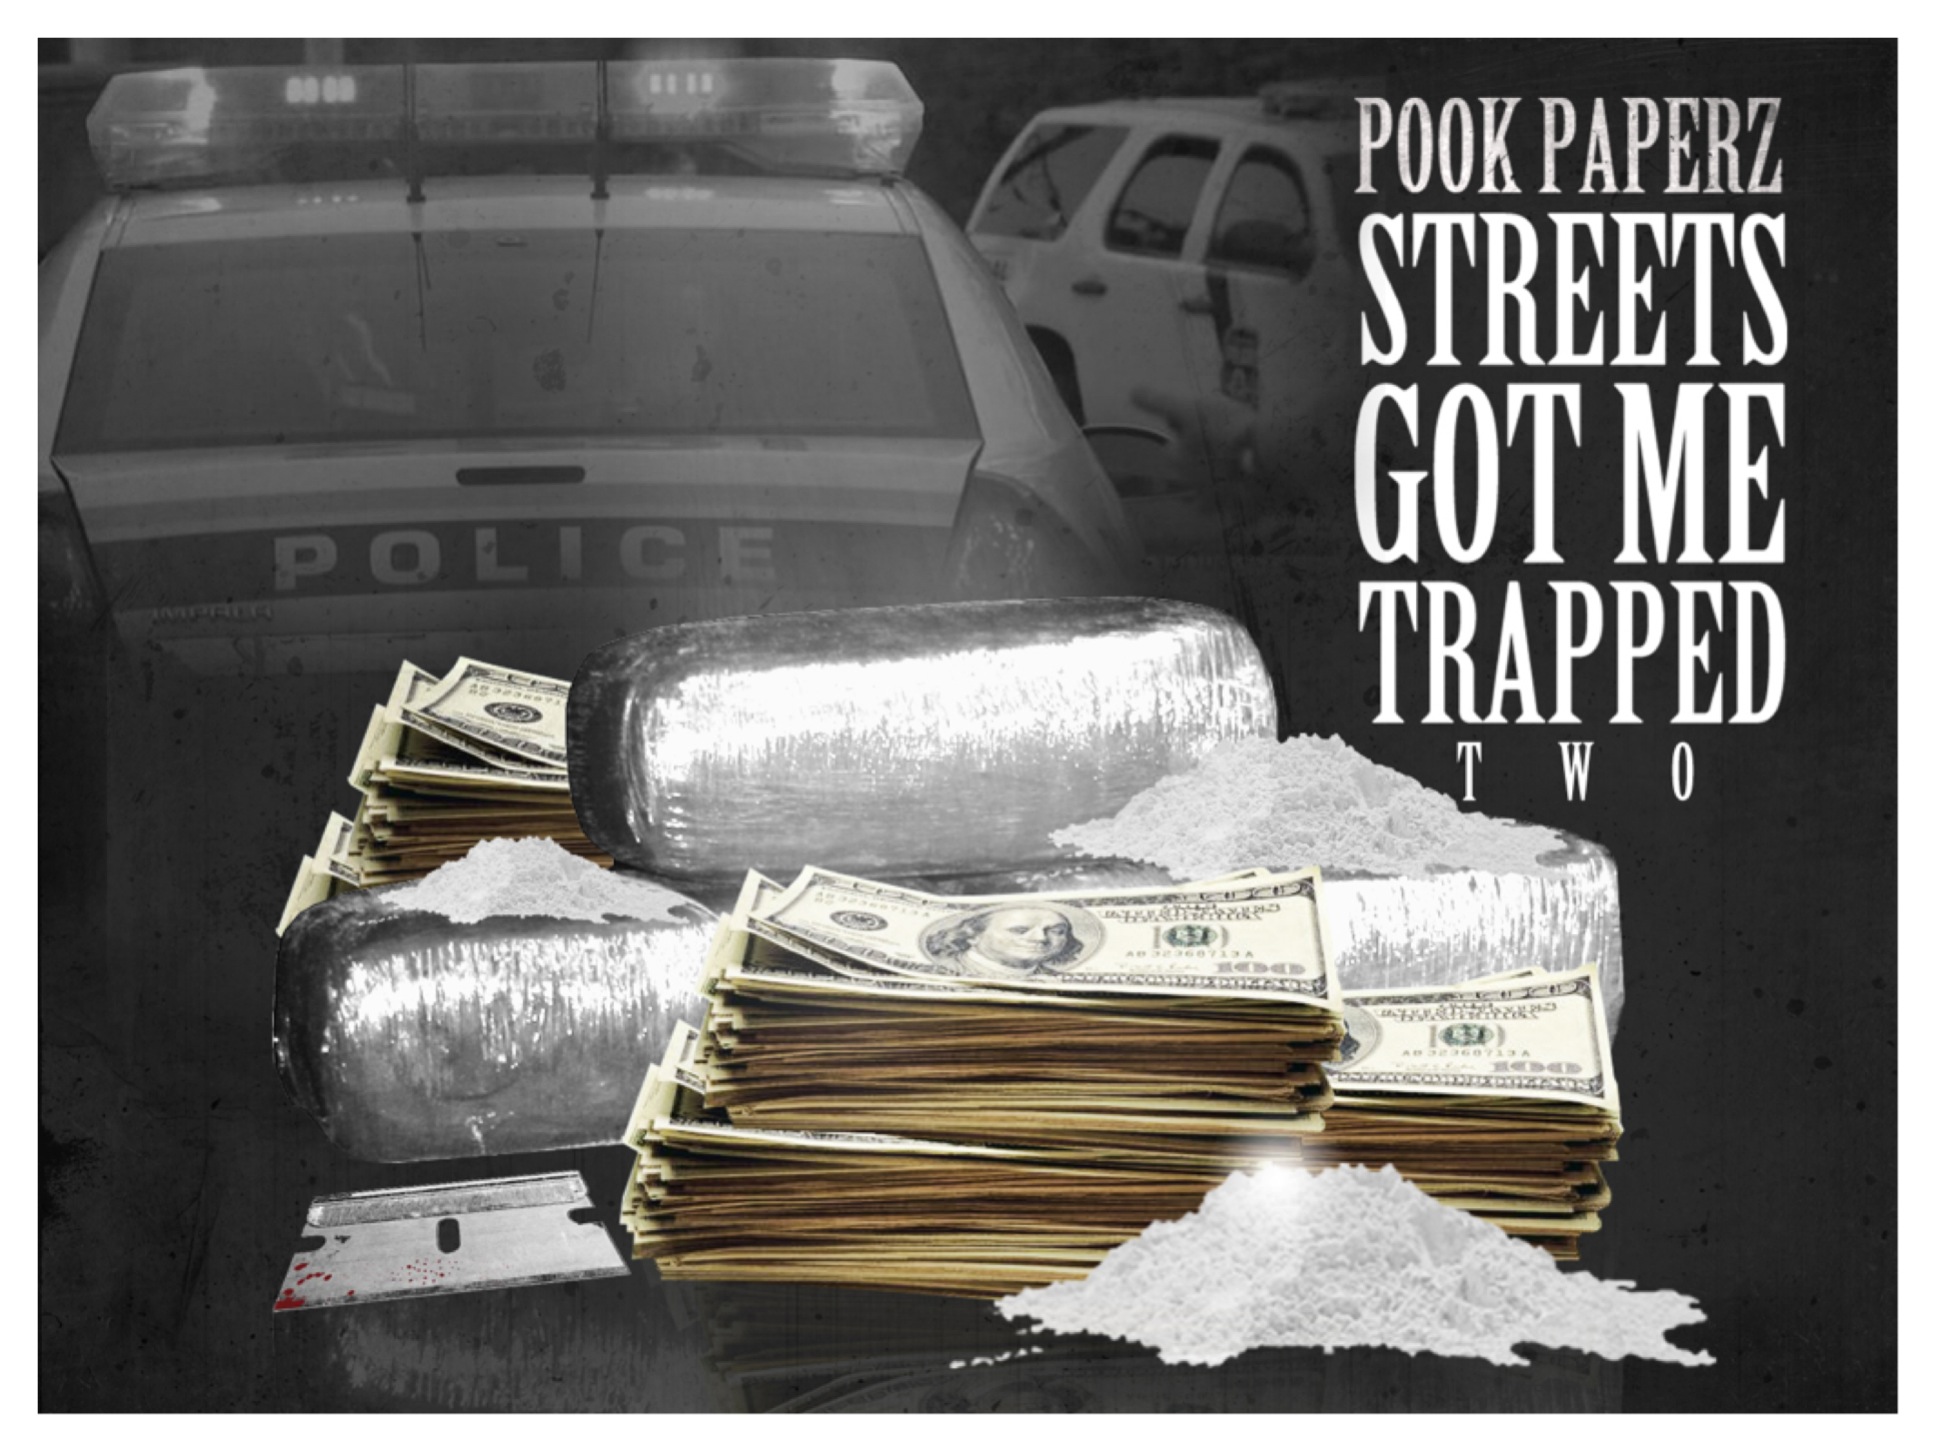 pook-paperz-streetz-got-me-trapped-2-official-video-HHS1987-2013 Pook Paperz - Streetz Got Me Trapped 2 (Official Video)  